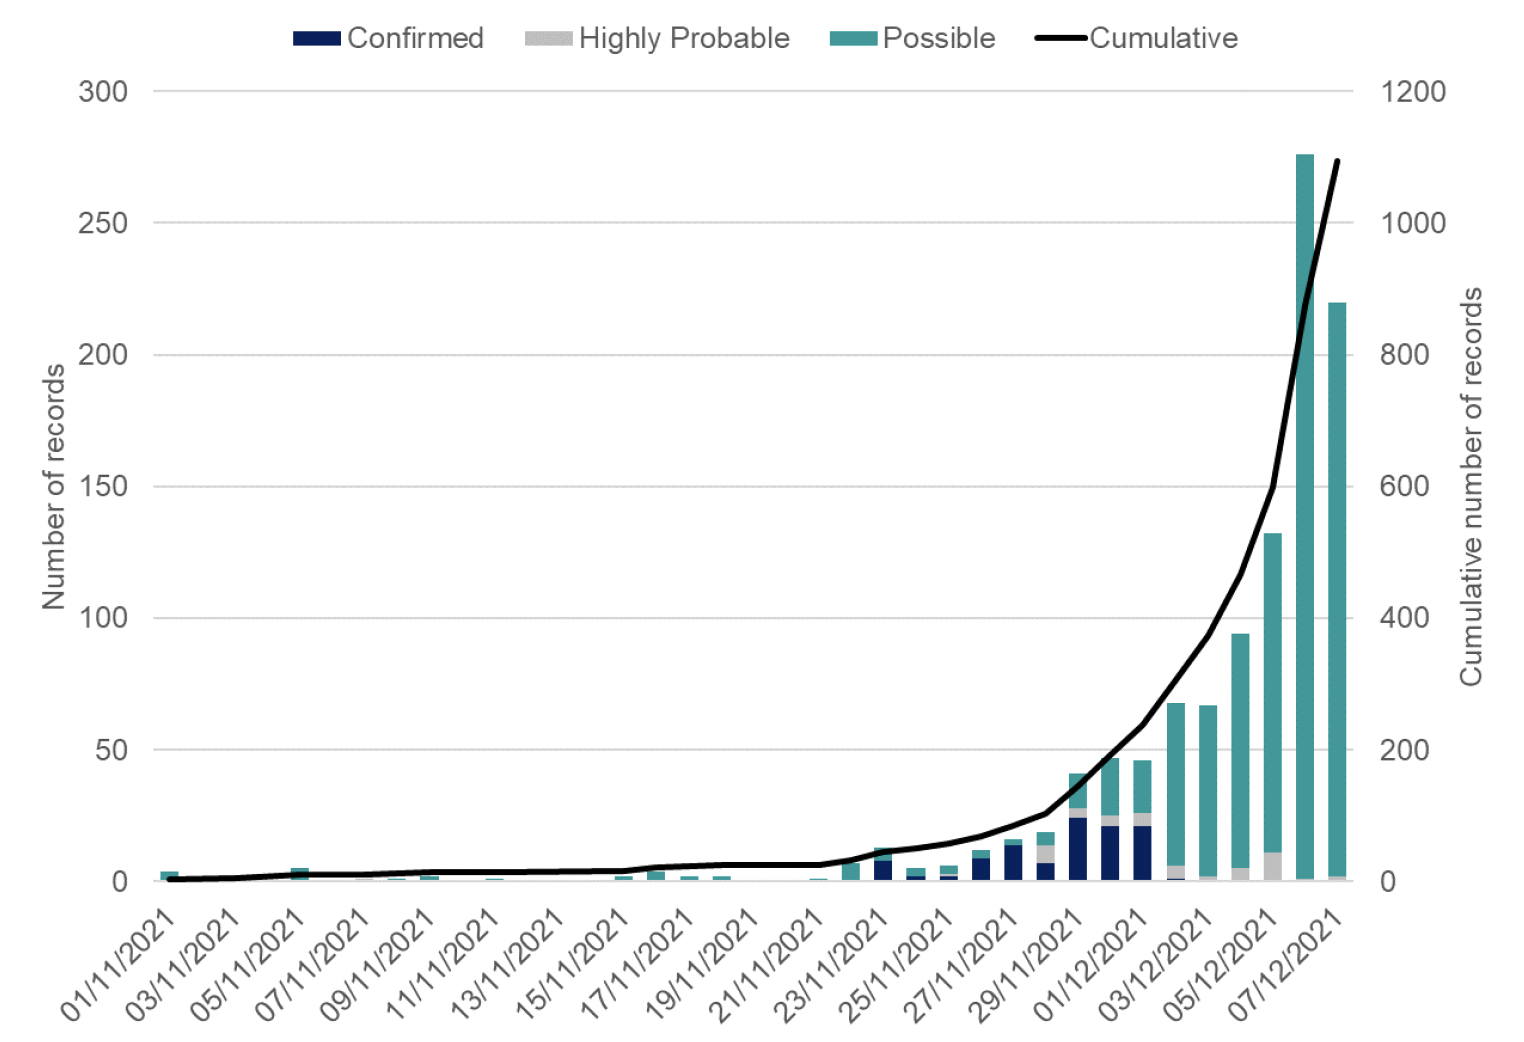 This column chart shows daily confirmed, highly probable, and possible Omicron variant cases identified in Scotland, increasing from 0 in early November to a total of 1,095 cases reported on 9 December. 